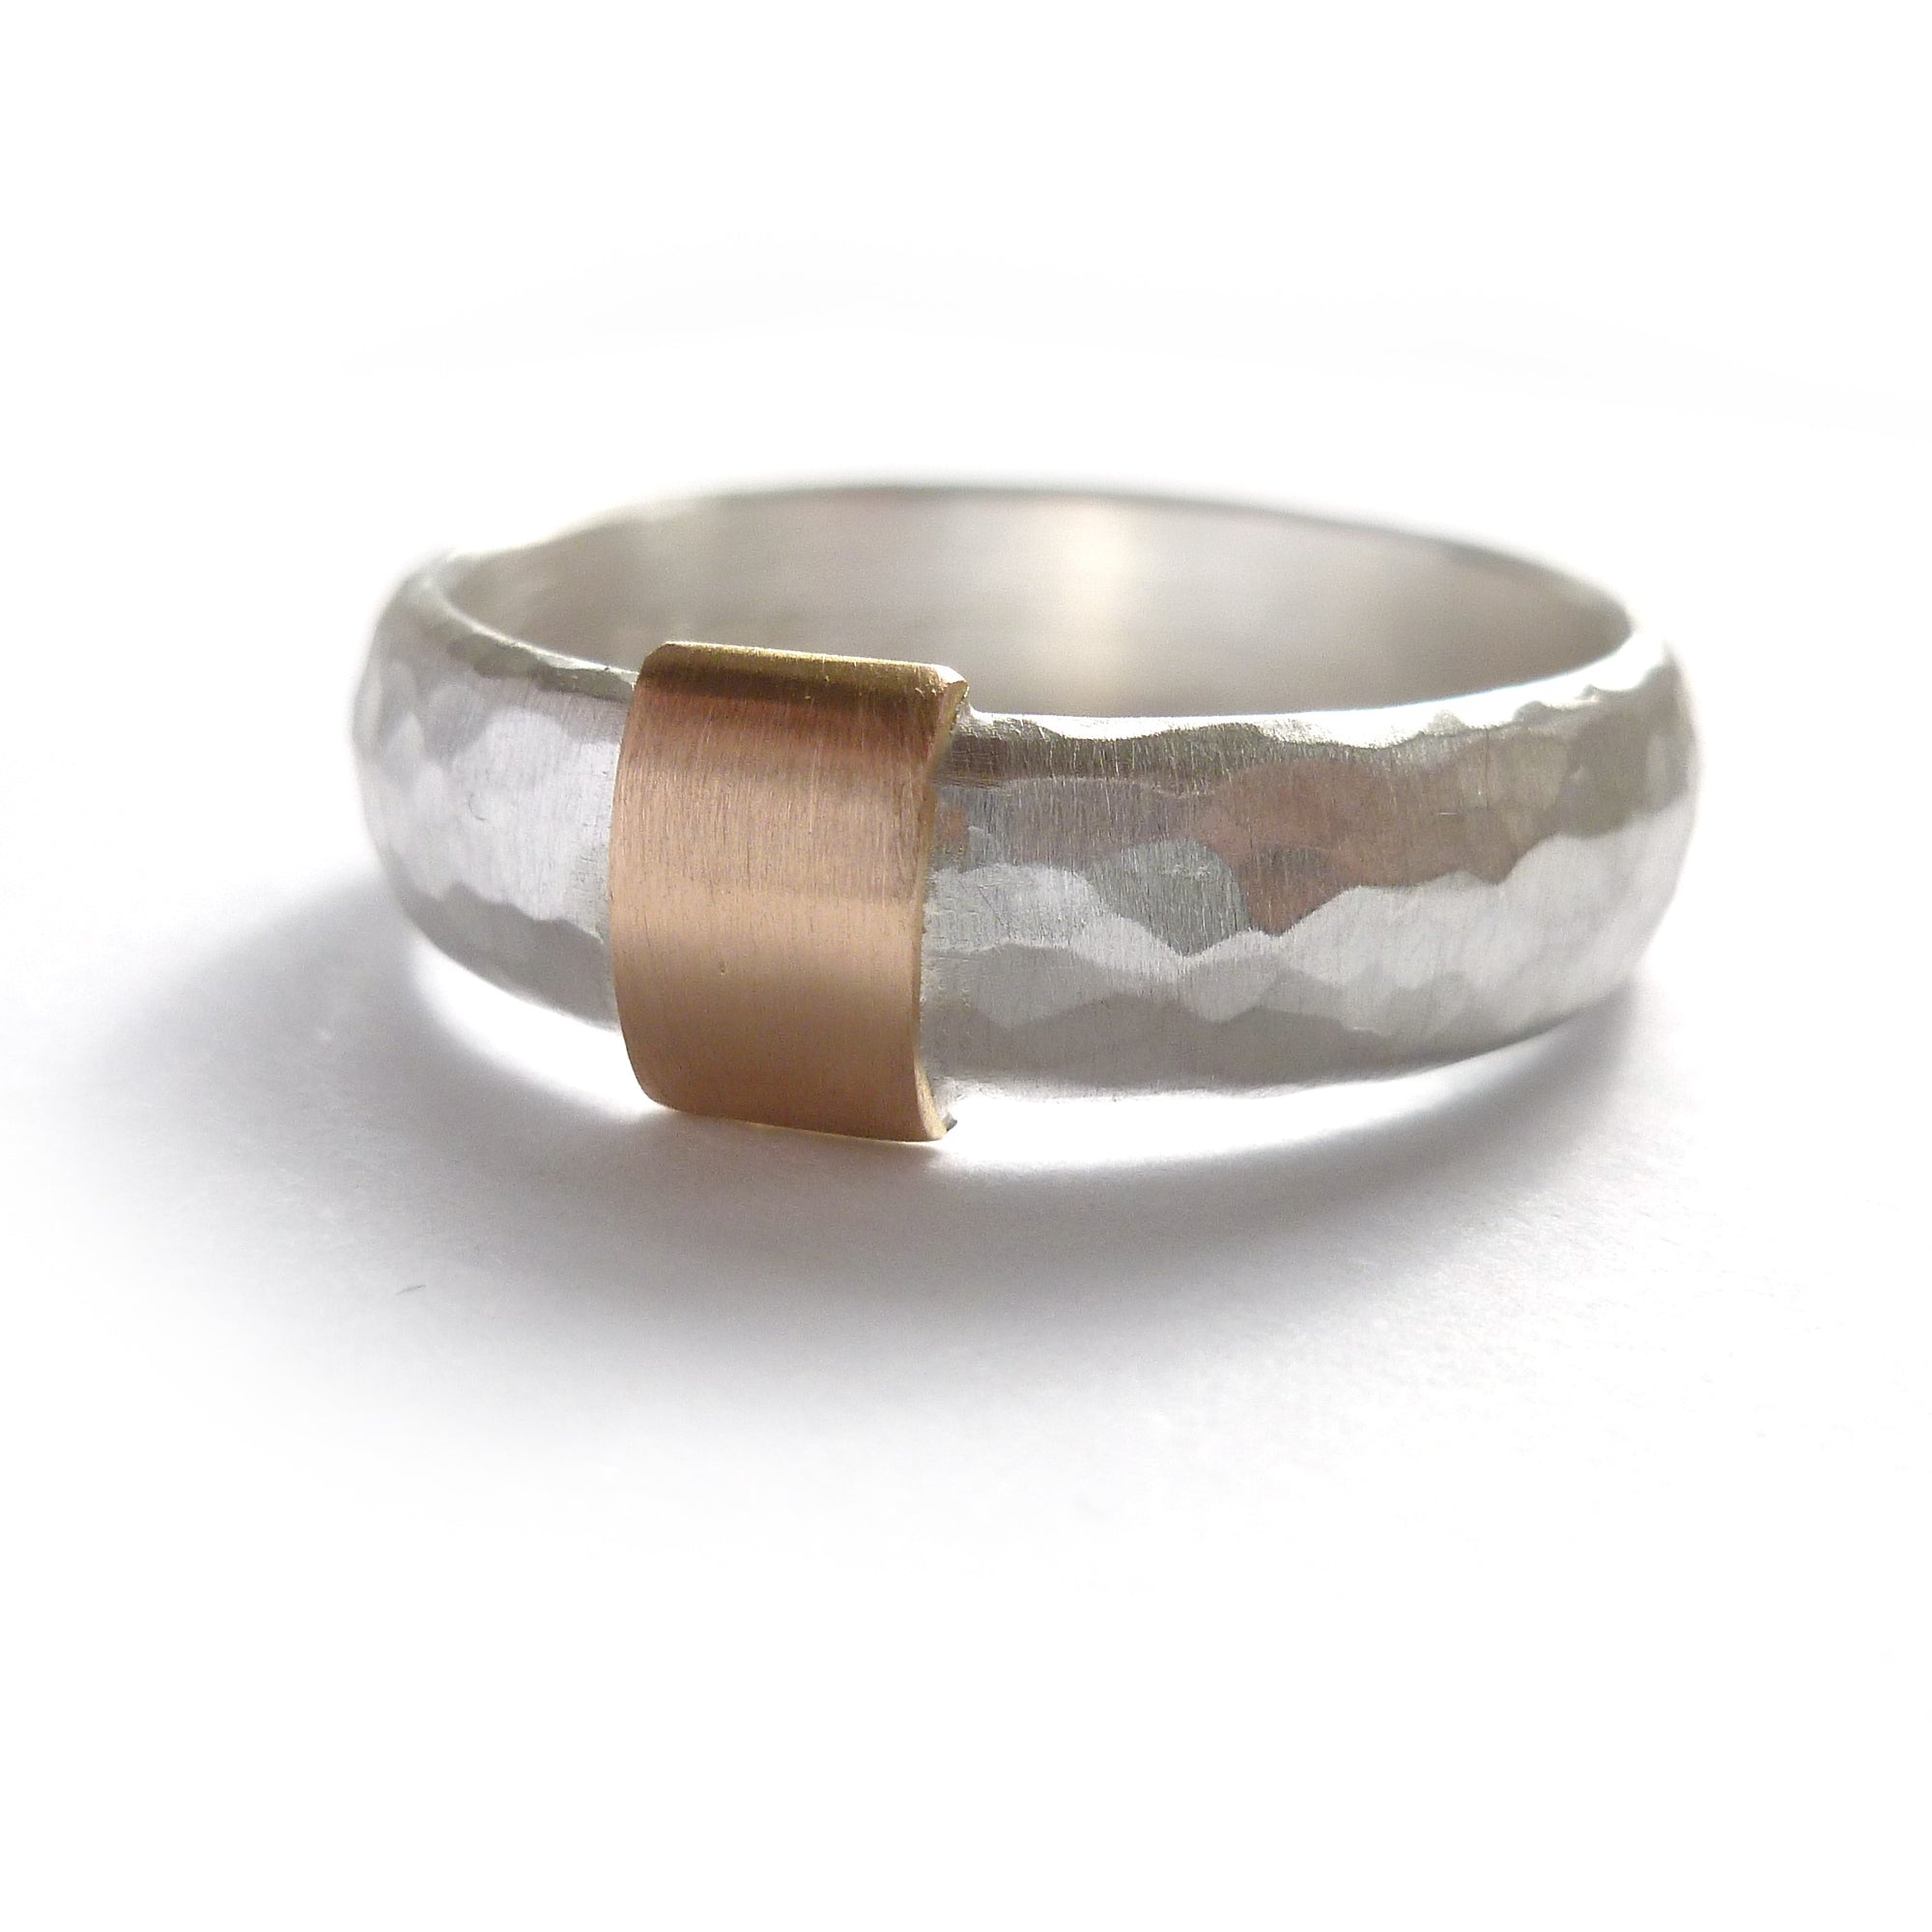 modern and unusual two tone silver and gold chinky ring for men or woman with a hammered finish. Handmade in UK